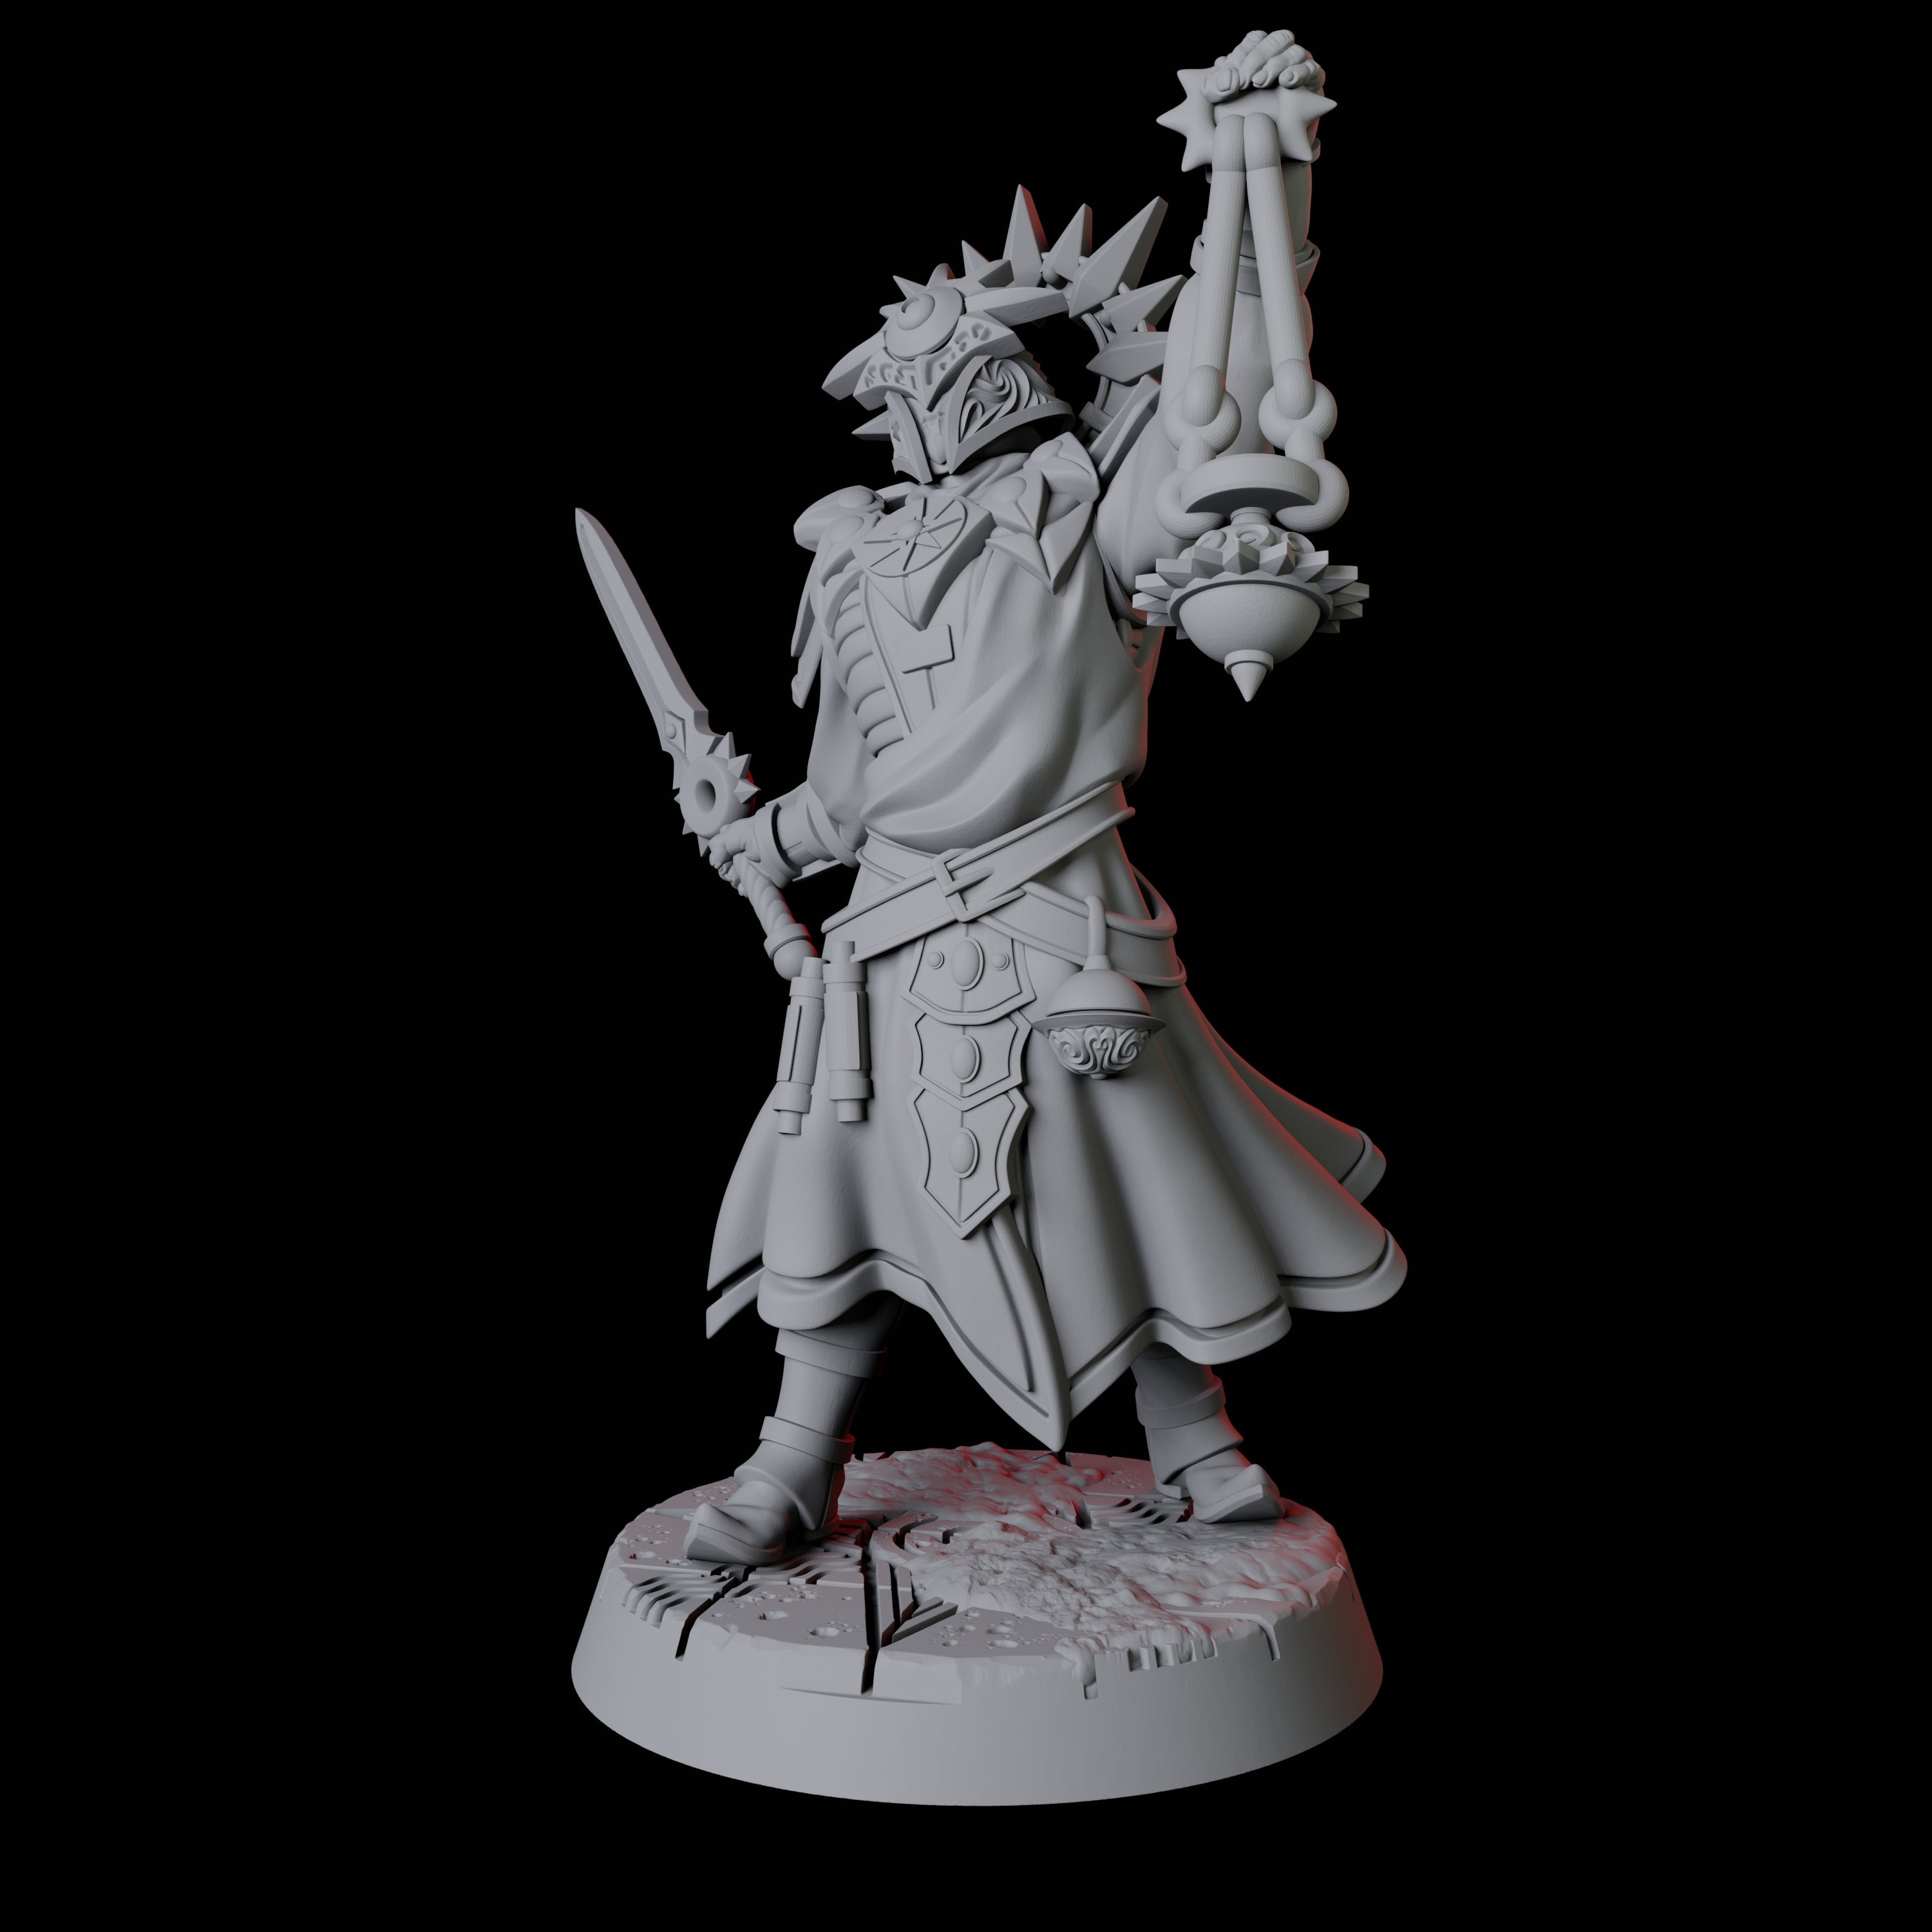 Sun Worshipping Cultist C Miniature for Dungeons and Dragons, Pathfinder or other TTRPGs